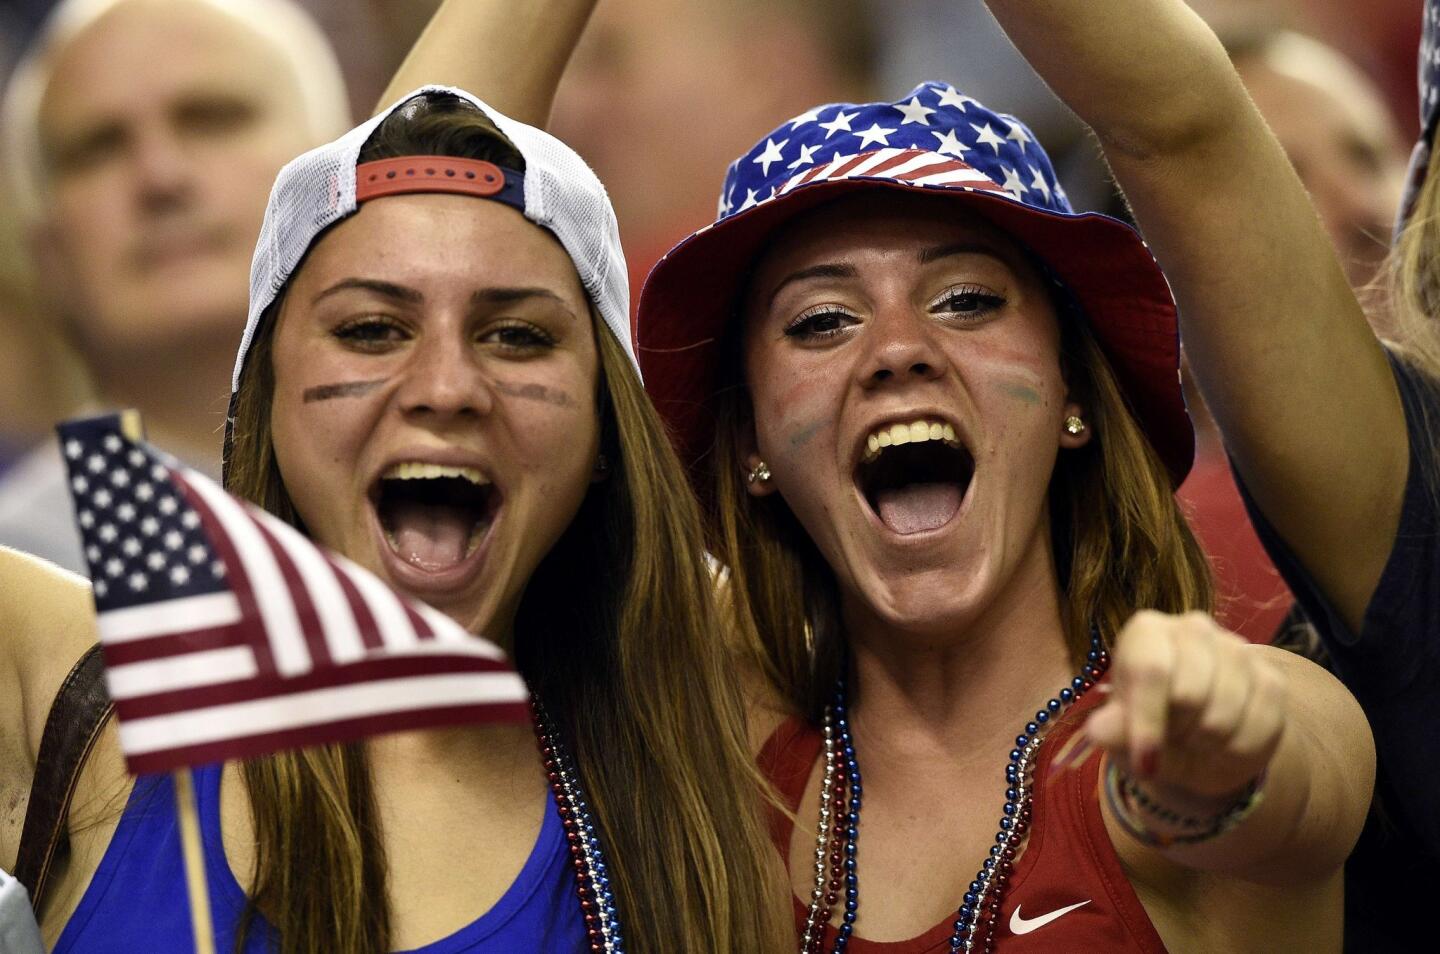 USA supporters cheer for their team ahead of the semi-final football match between USA and Germany during their 2015 FIFA Women's World Cup at the Olympic Stadium in Montreal on June 30, 2015. AFP PHOTO / FRANCK FIFEFRANCK FIFE/AFP/Getty Images ** OUTS - ELSENT, FPG - OUTS * NM, PH, VA if sourced by CT, LA or MoD **